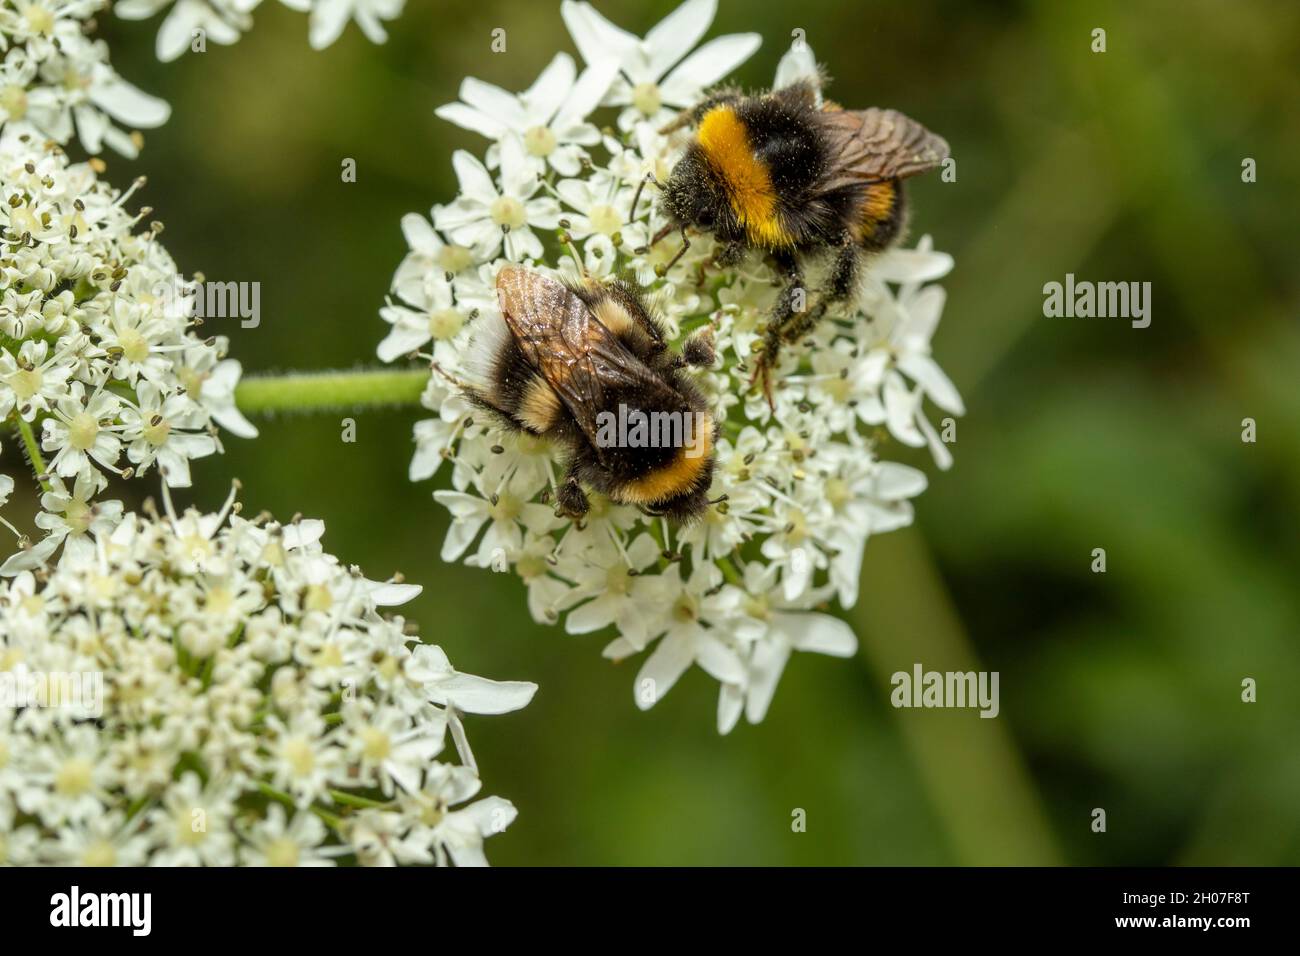 Hedgerow Hogweed flowers in close-up Stock Photo